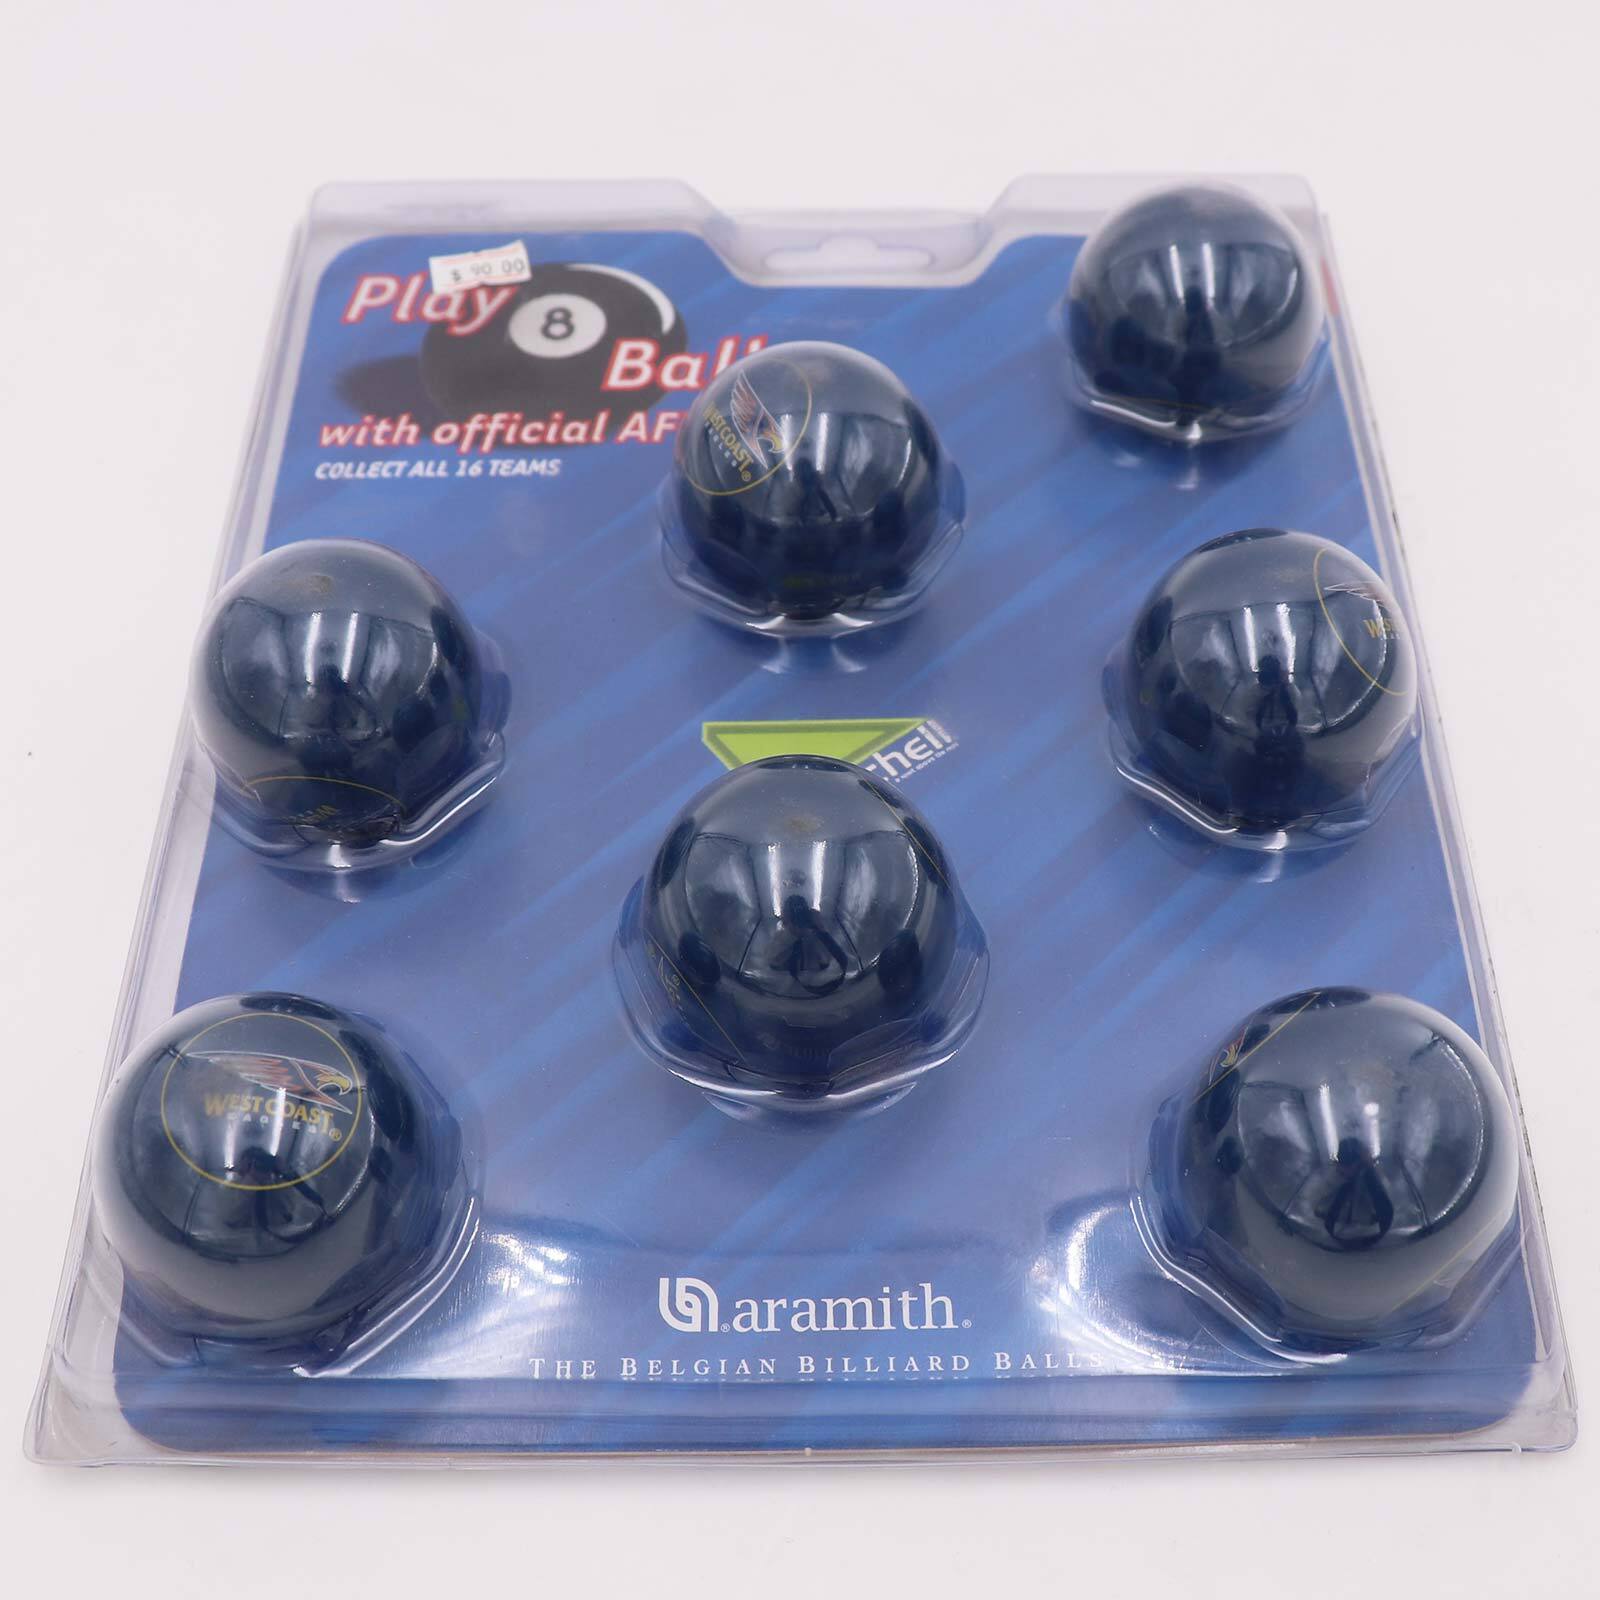 Aramith Pool Snooker Billiards Balls with official AFL Team logos - Eagles